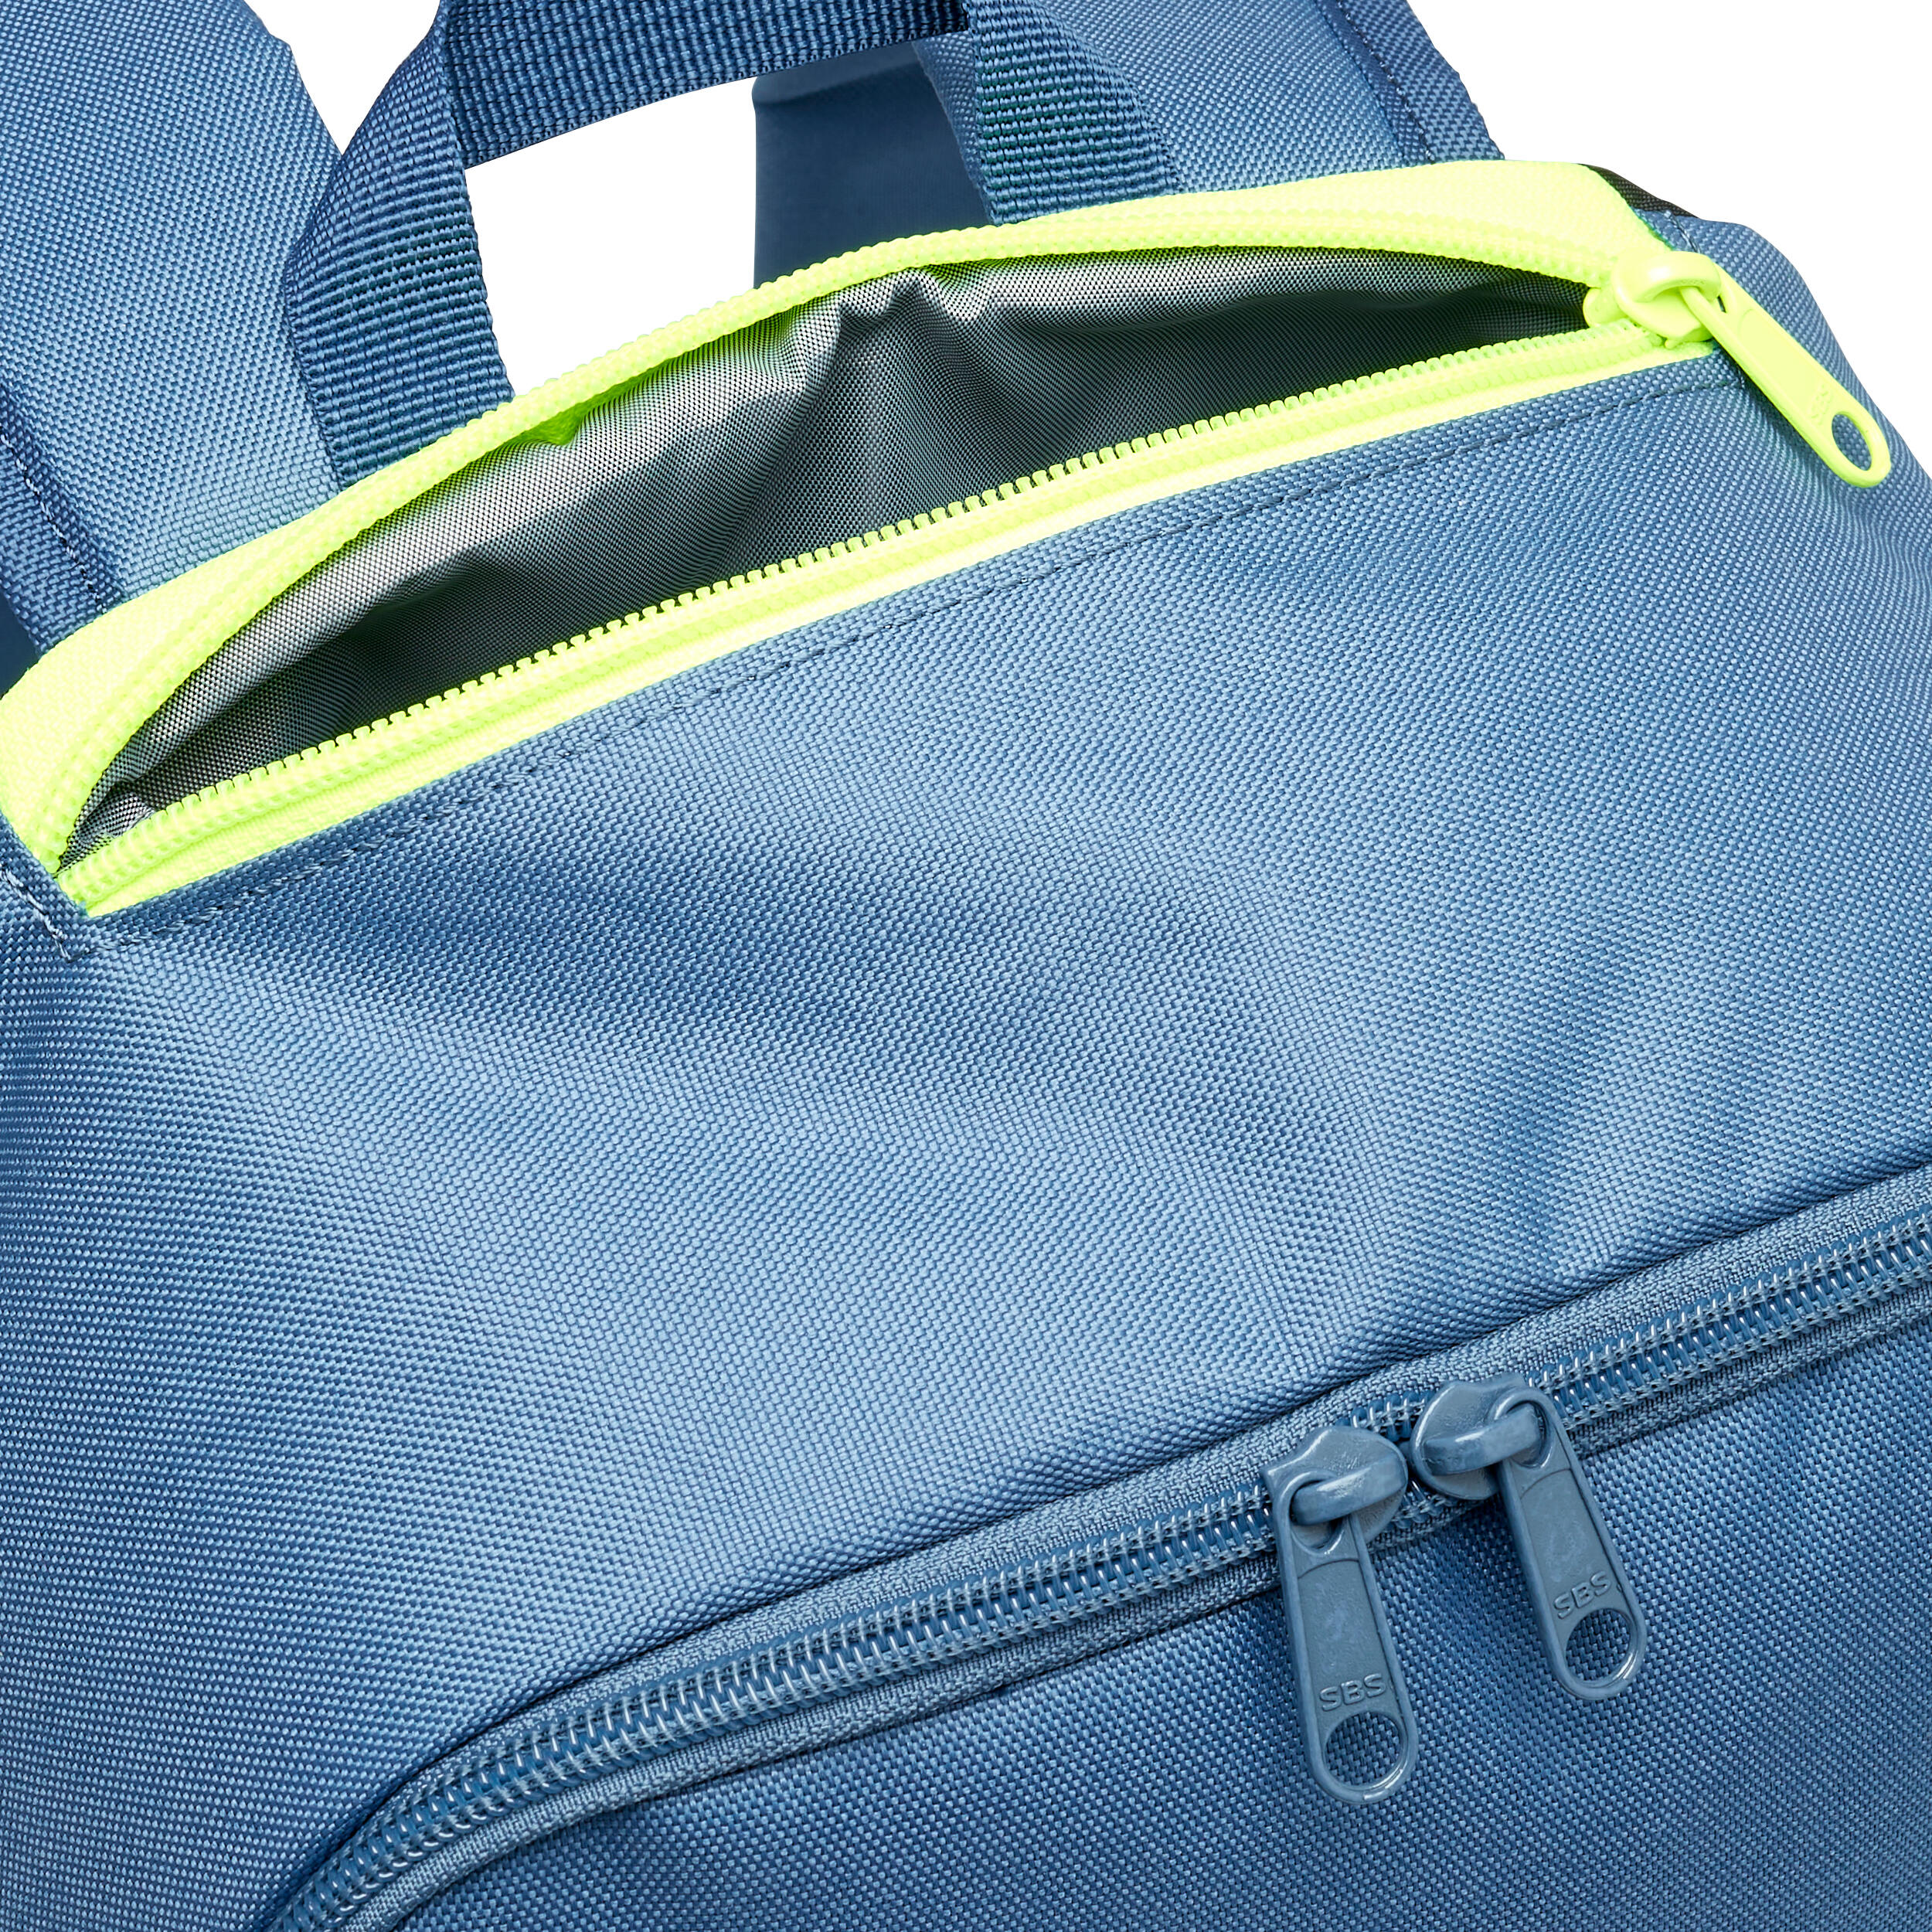 Essential Backpack - 17 L Blue - Blue-grey, Whale grey, Fluo lime ...